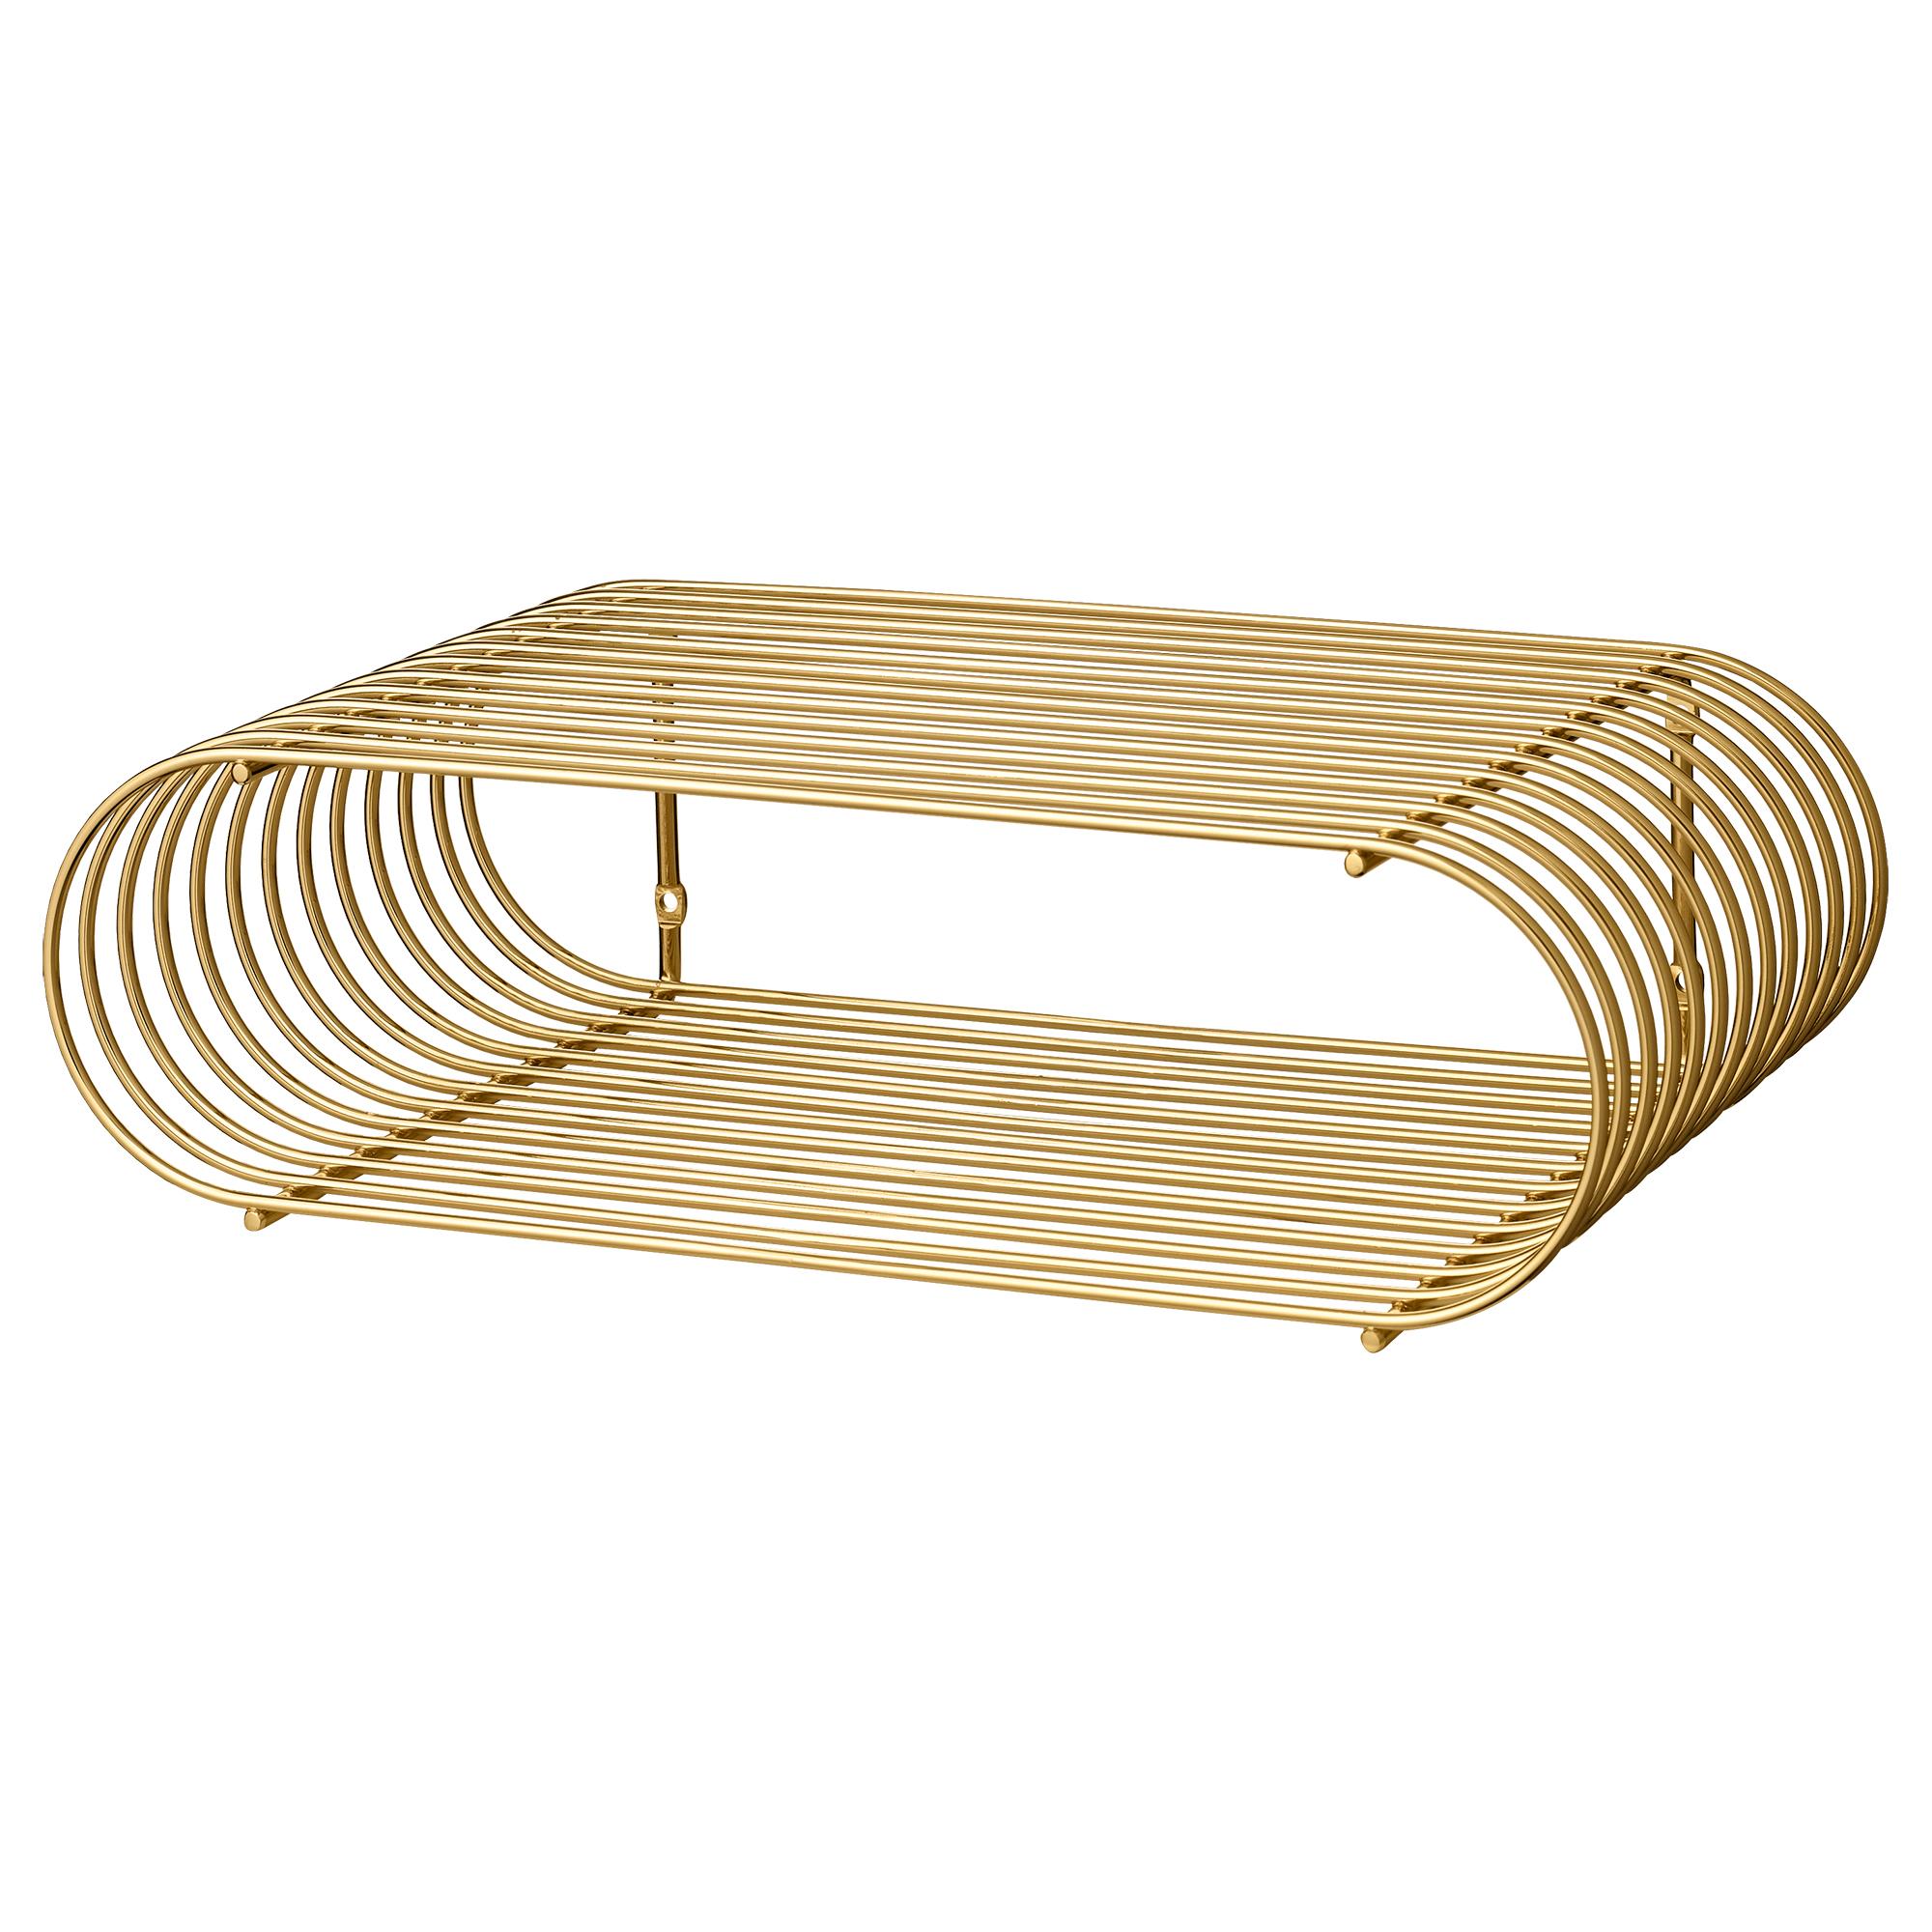 Small gold contemporary shelf
Dimensions: L 40.4 x W 25.3 x H 12 cm 
Materials: Steel.
Also available in black and silver.


It is not always easy to determine what makes a design become an icon, but it seems the Curva shelf has accomplished